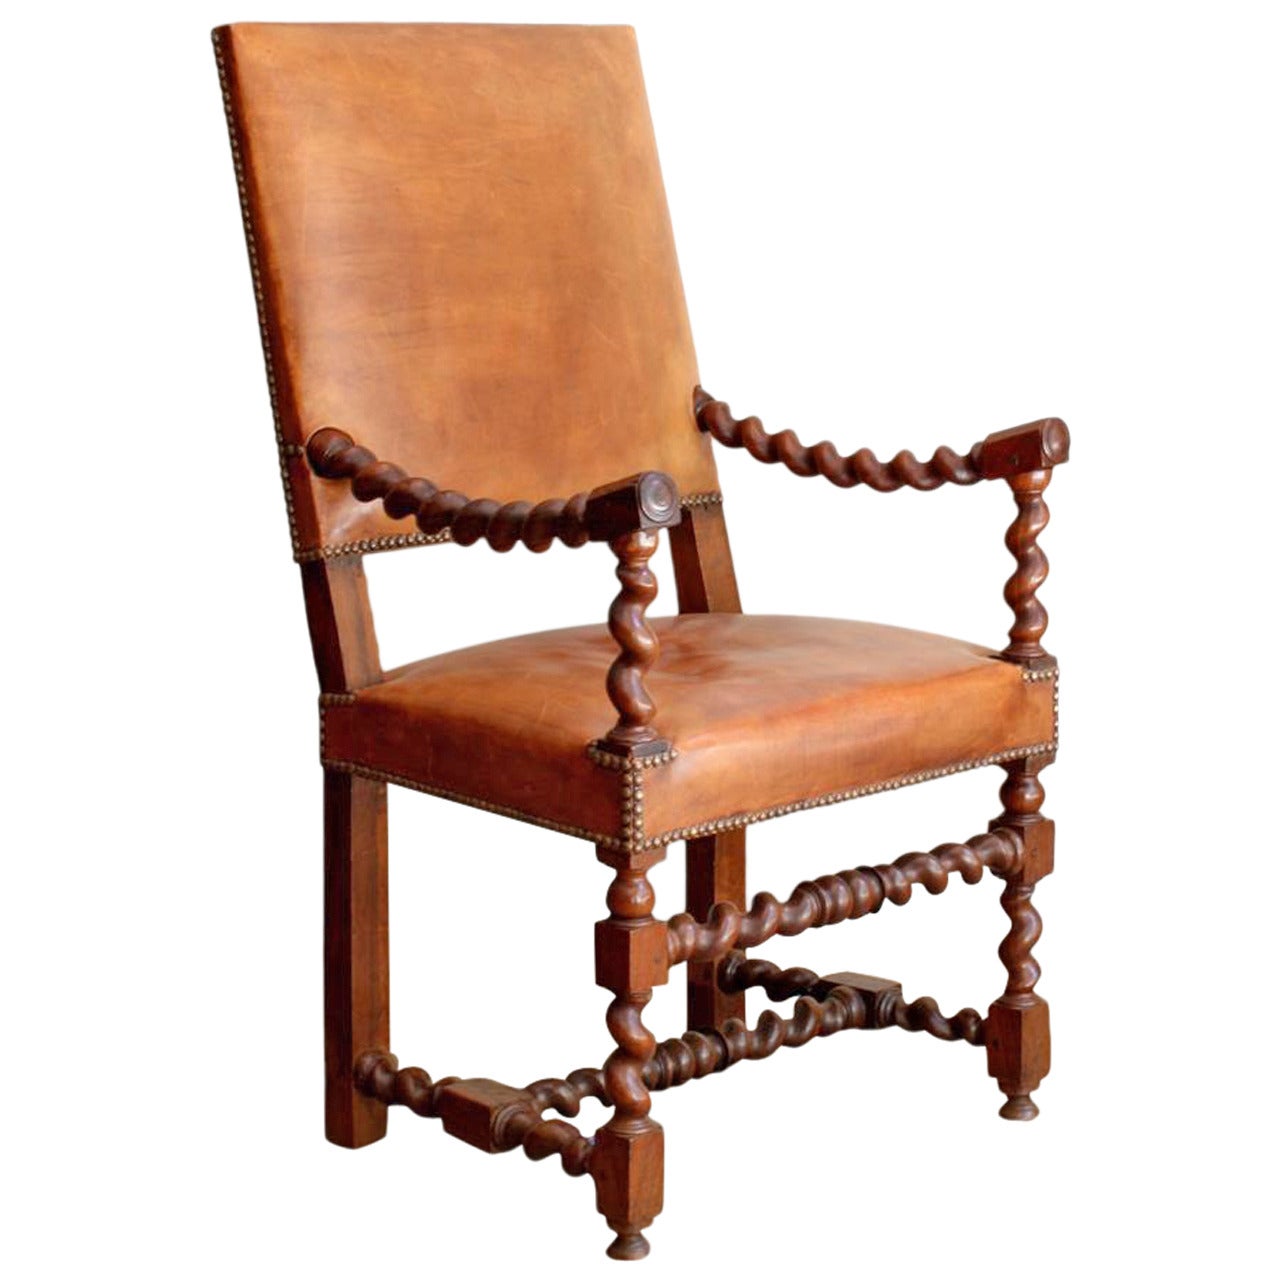 Unique French Walnut Barley Twist Leather Armchair,  19th Century For Sale